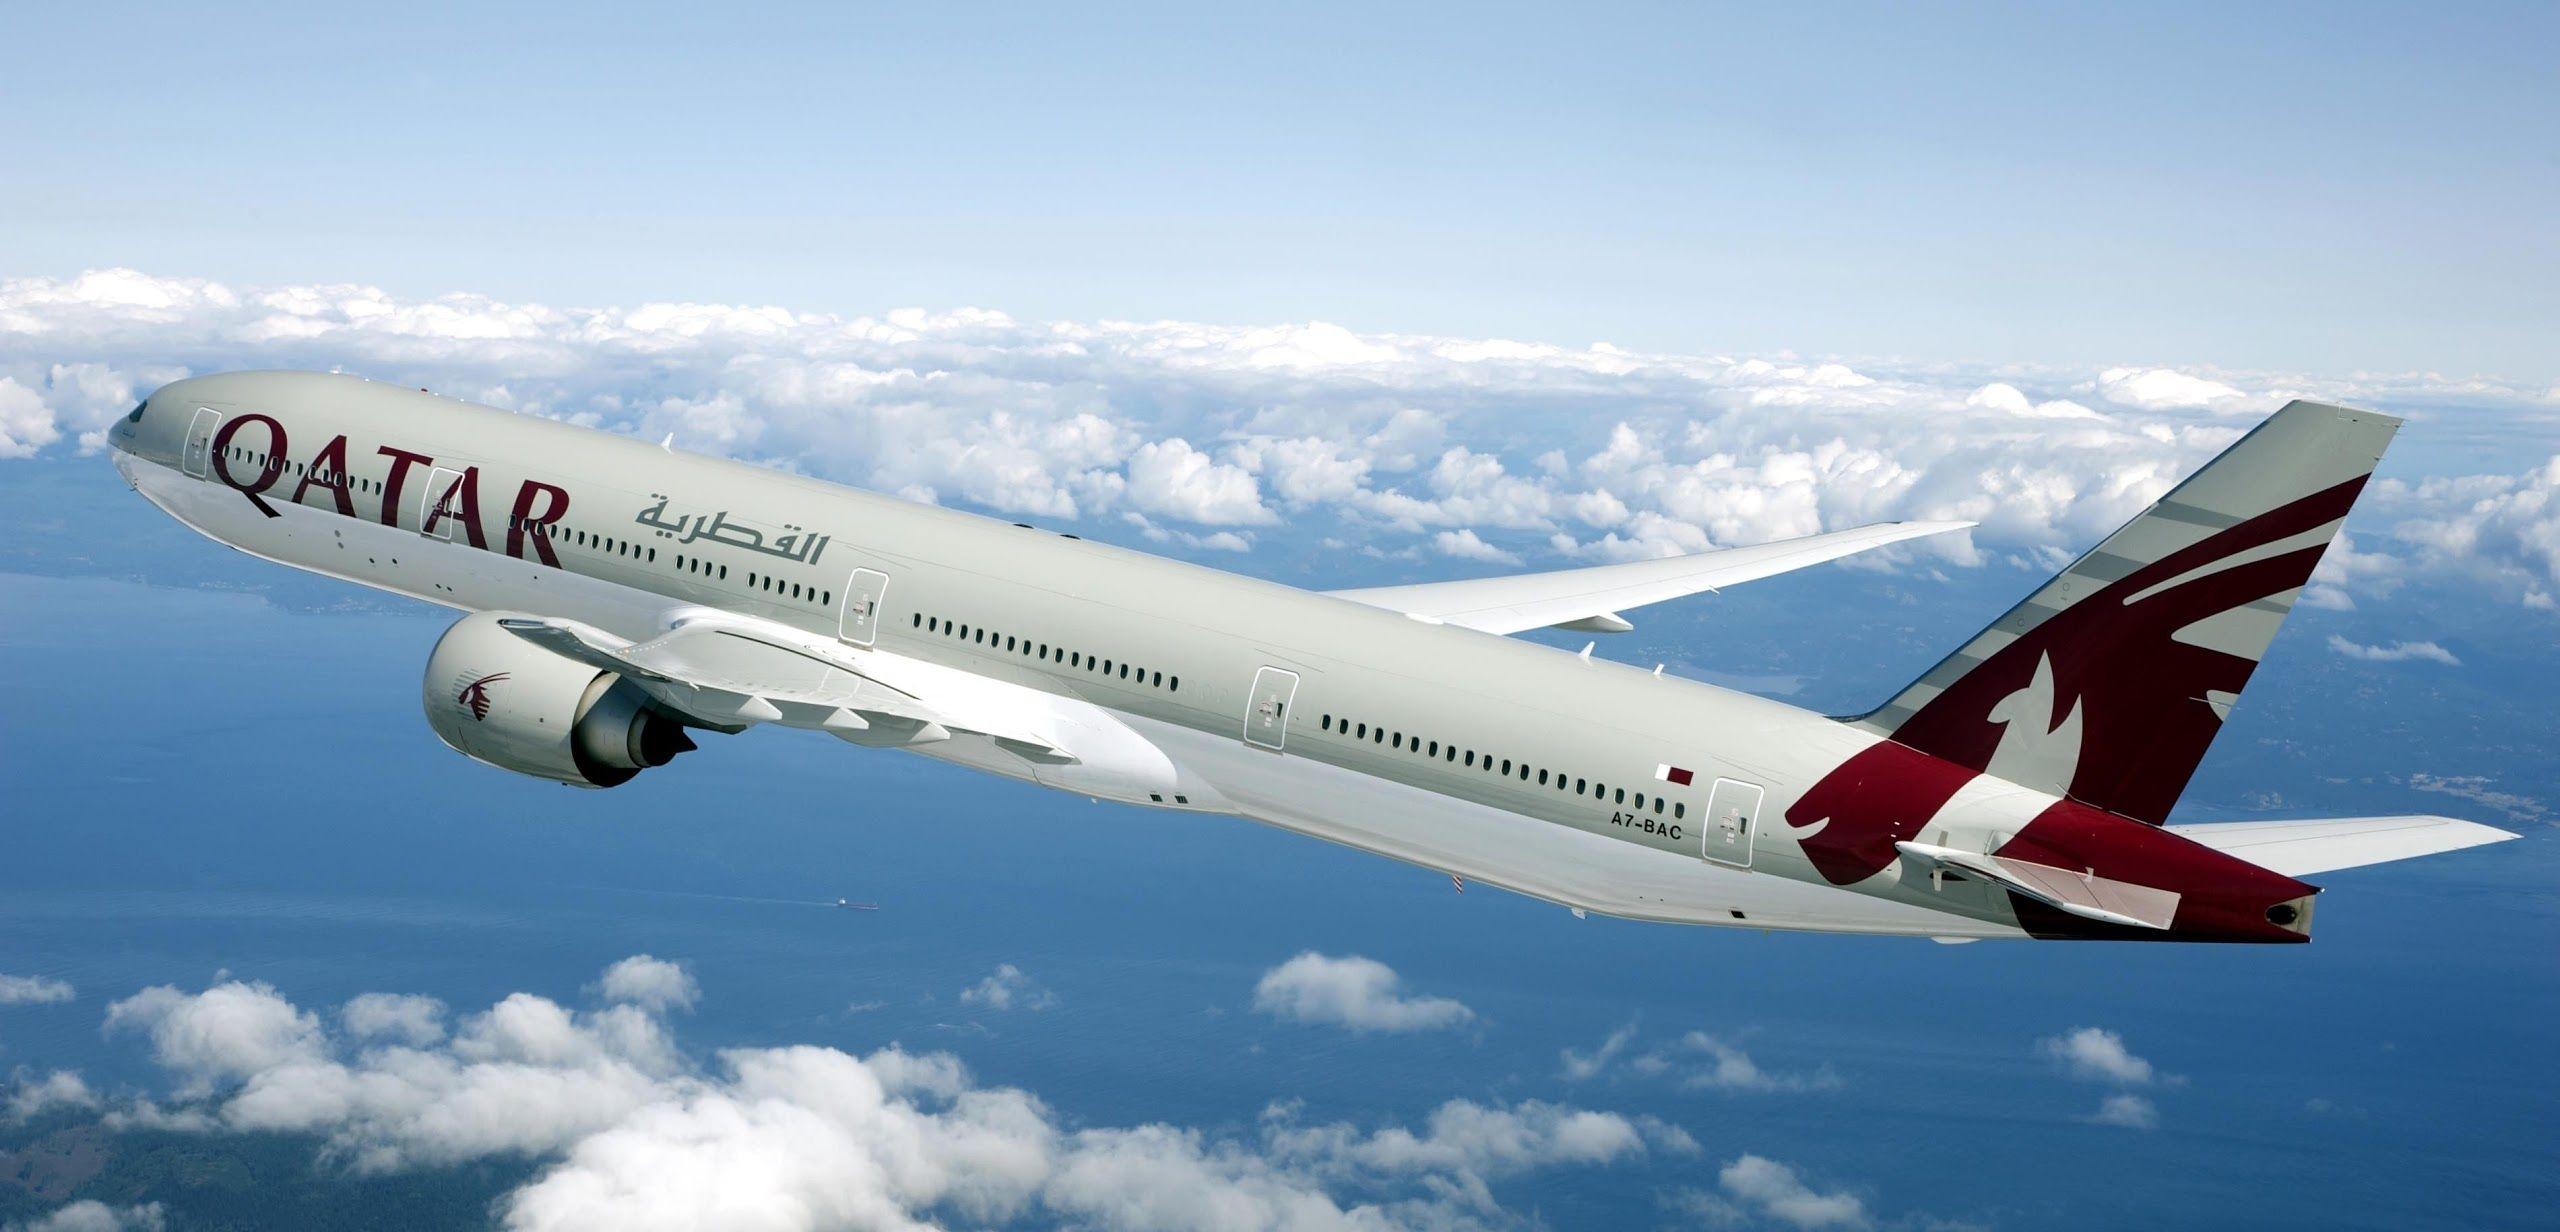 BOEING 777 airliner aircraft airplane plane jet (1) wallpaper